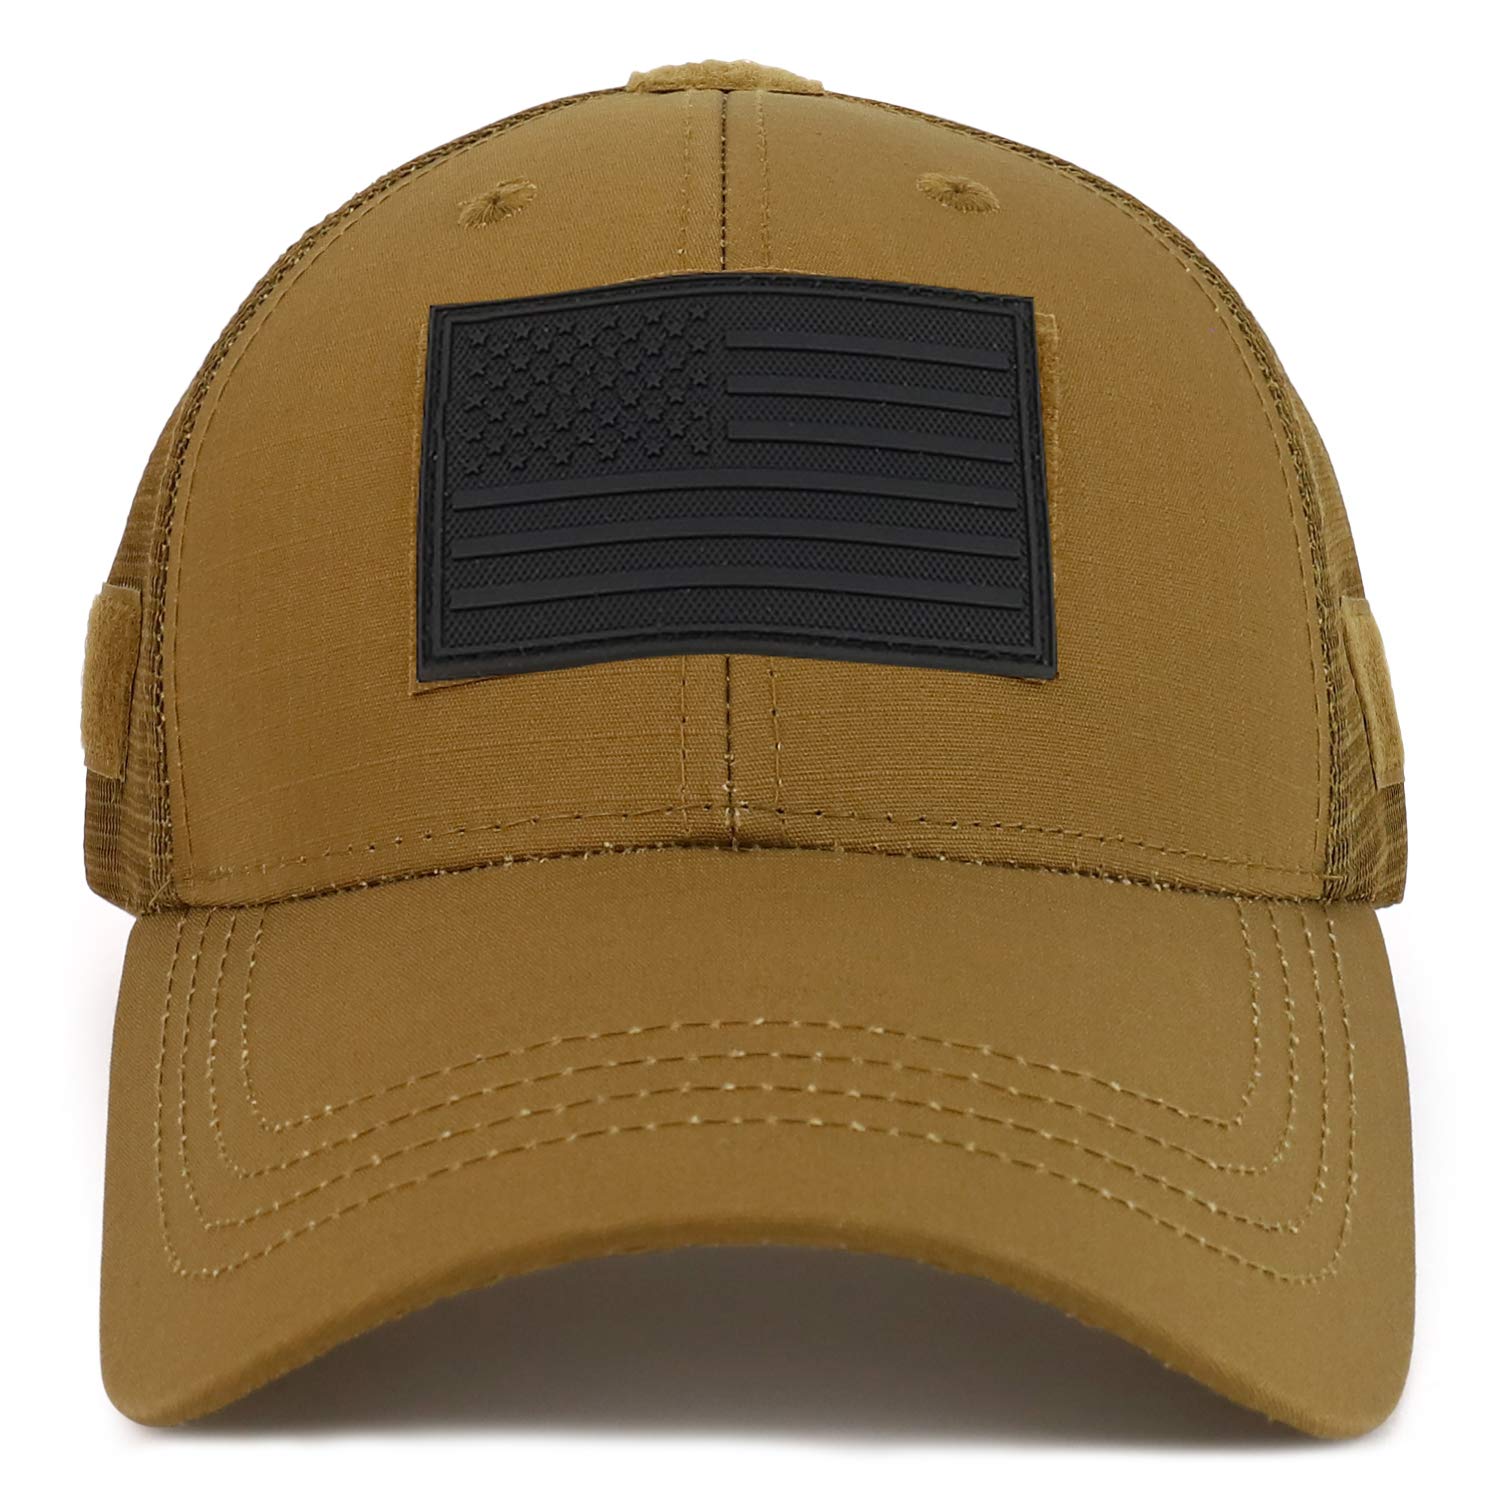 Armycrew US American Flag Black 3D Rubber Tactical Patch Trucker Mesh Back Cap